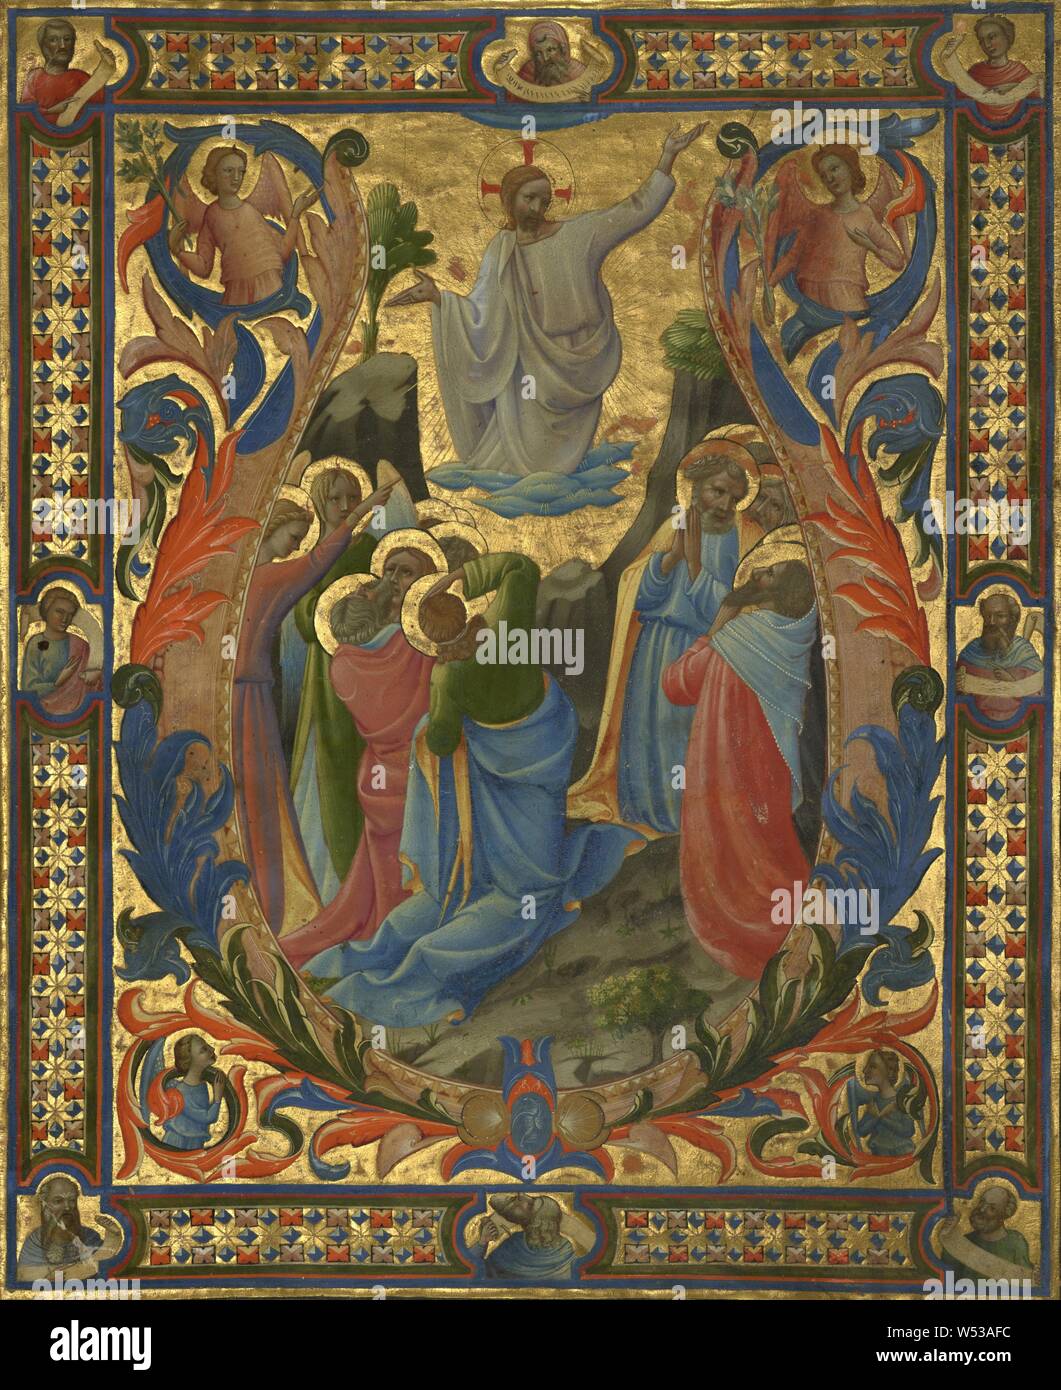 Initial V:  The Ascension, Designed by Lorenzo Monaco (Italian, about 1370 - 1423 or 1424), and completed by Zanobi di Benedetto Strozzi (Italian, 1412 - 1468), and Battista di Biagio Sanguini (Italian, 1393 - 1451), Florence, Italy, designed about 1410, completed about 1431, Tempera and gold on parchment, Leaf: 40.2 x 32.7 cm (15 13/16 x 12 7/8 in Stock Photo